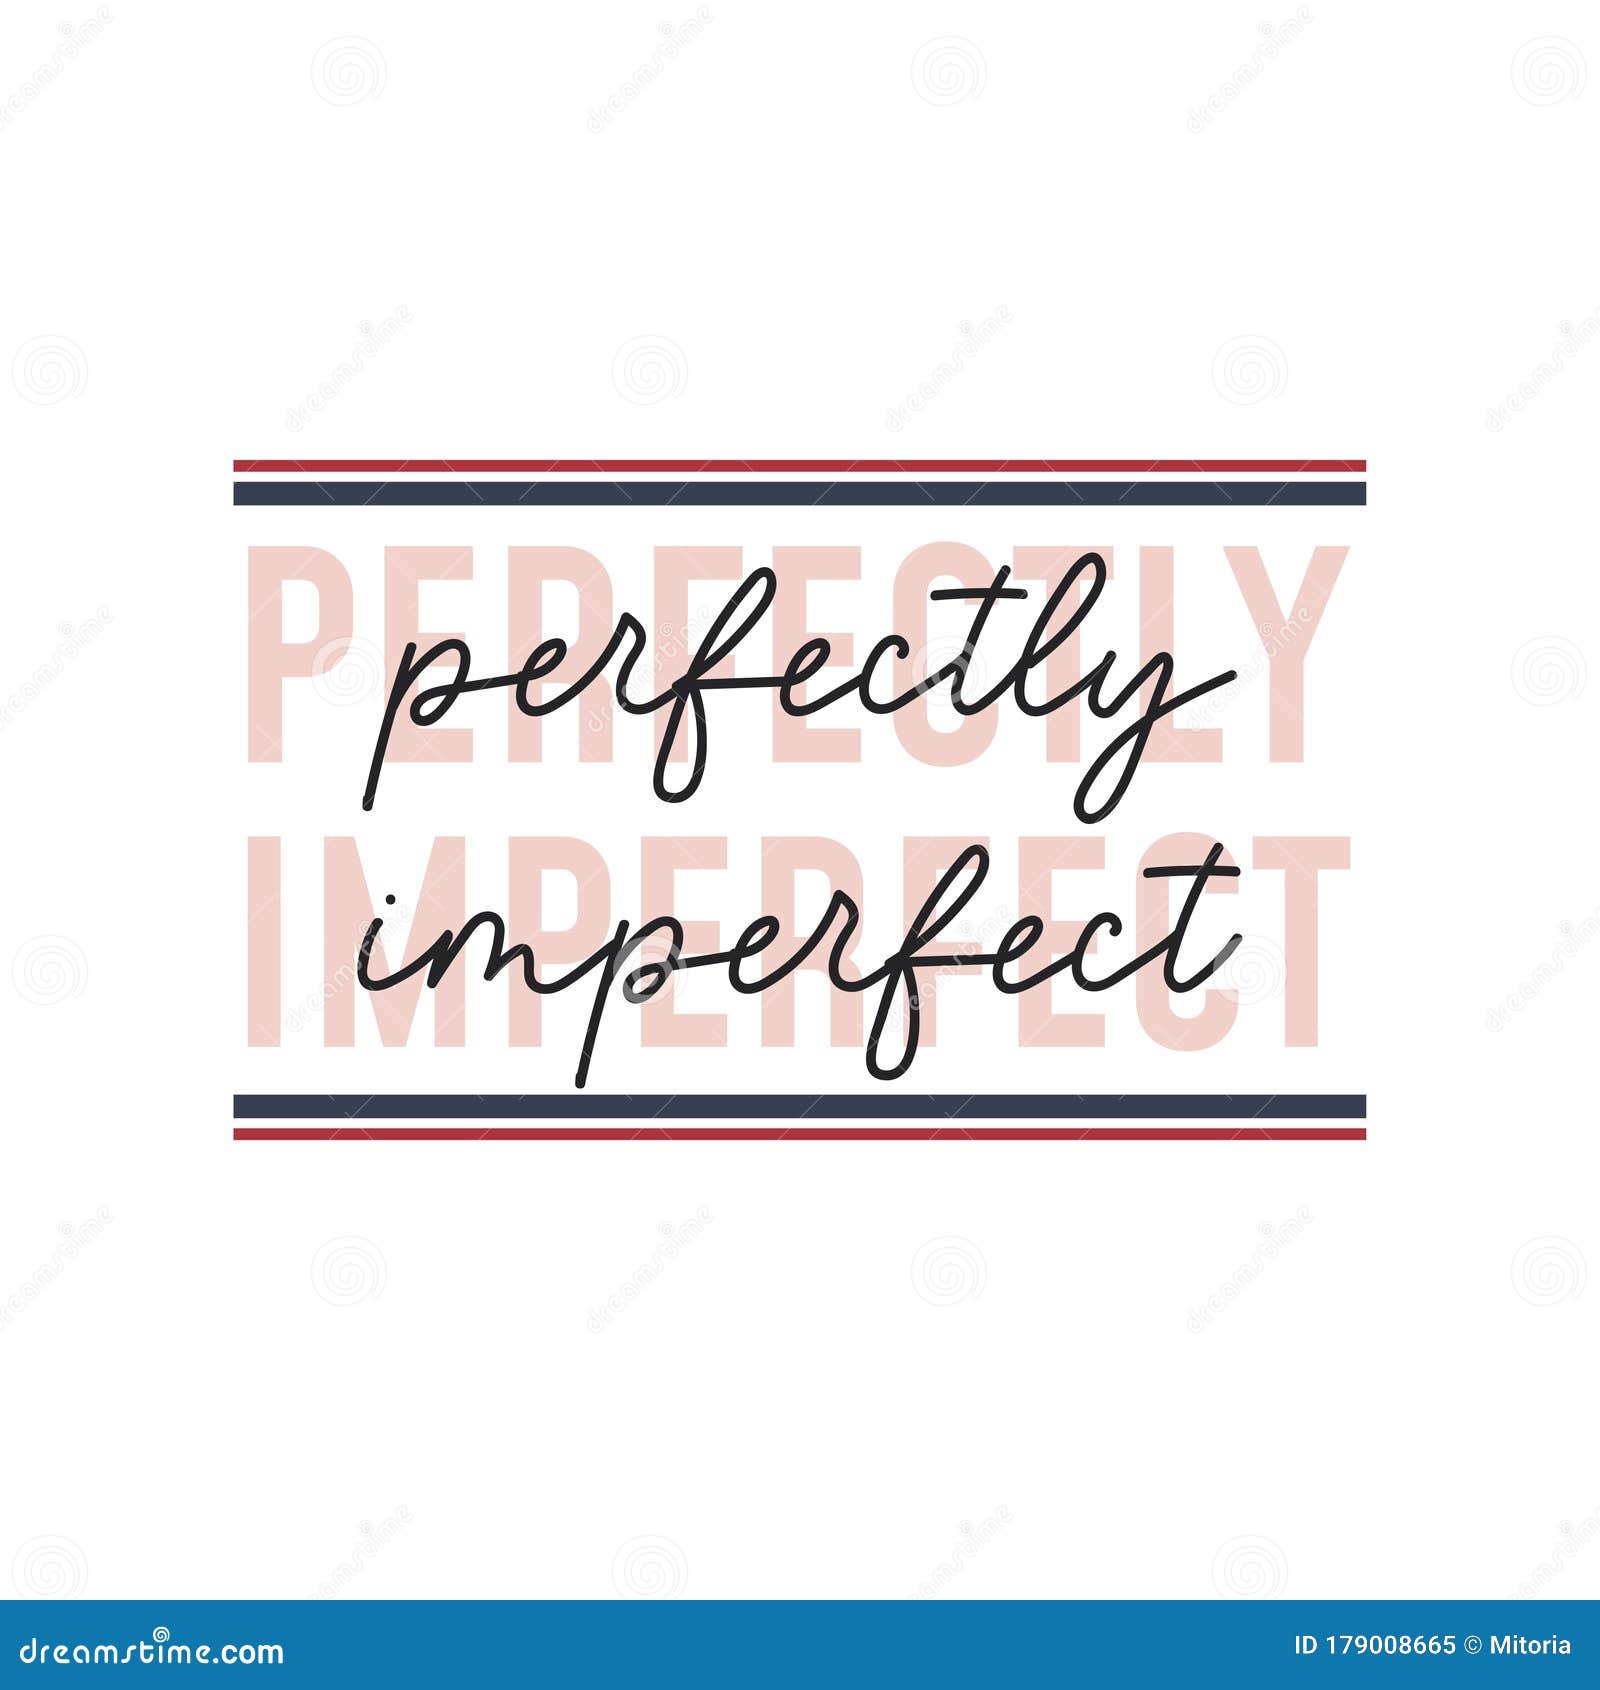 perfectly imperfect inspirational cute quote